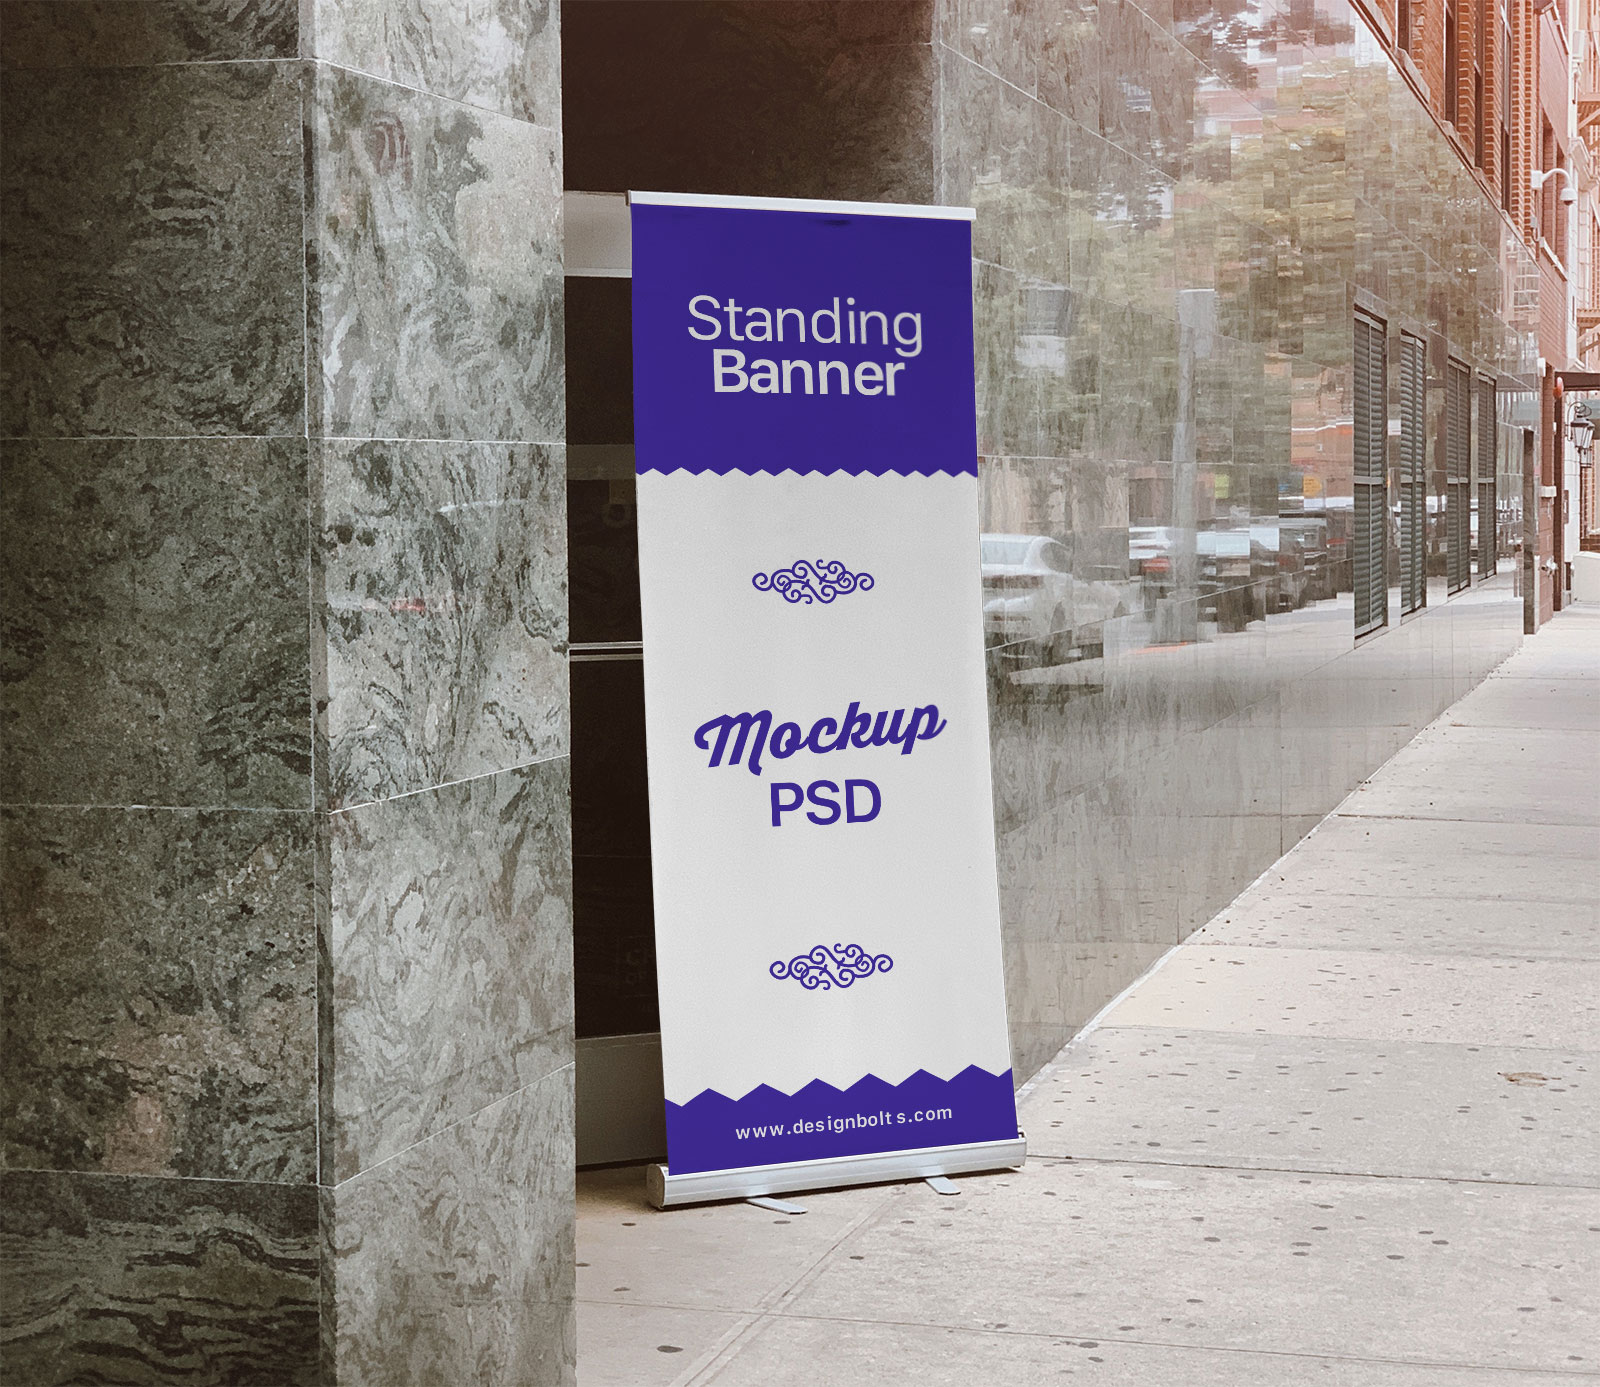 Free-Outdoor-Advertising-Standing-Banner-on-Road-Banner-Mockup-PSD-2